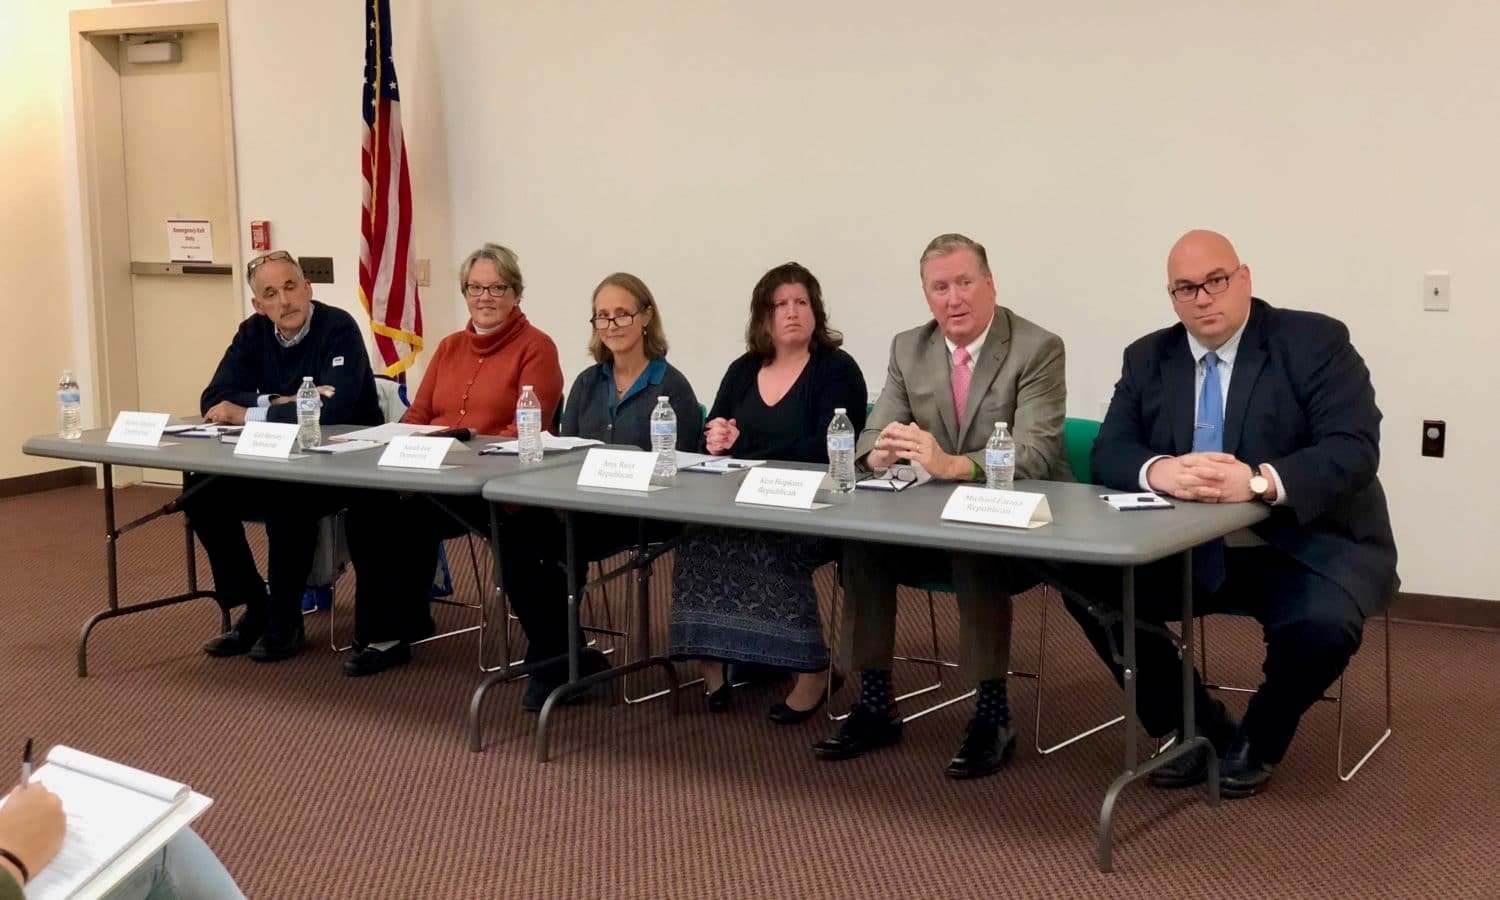 Guns and ICE among concerns at Cranston City Council city-wide candidate forum